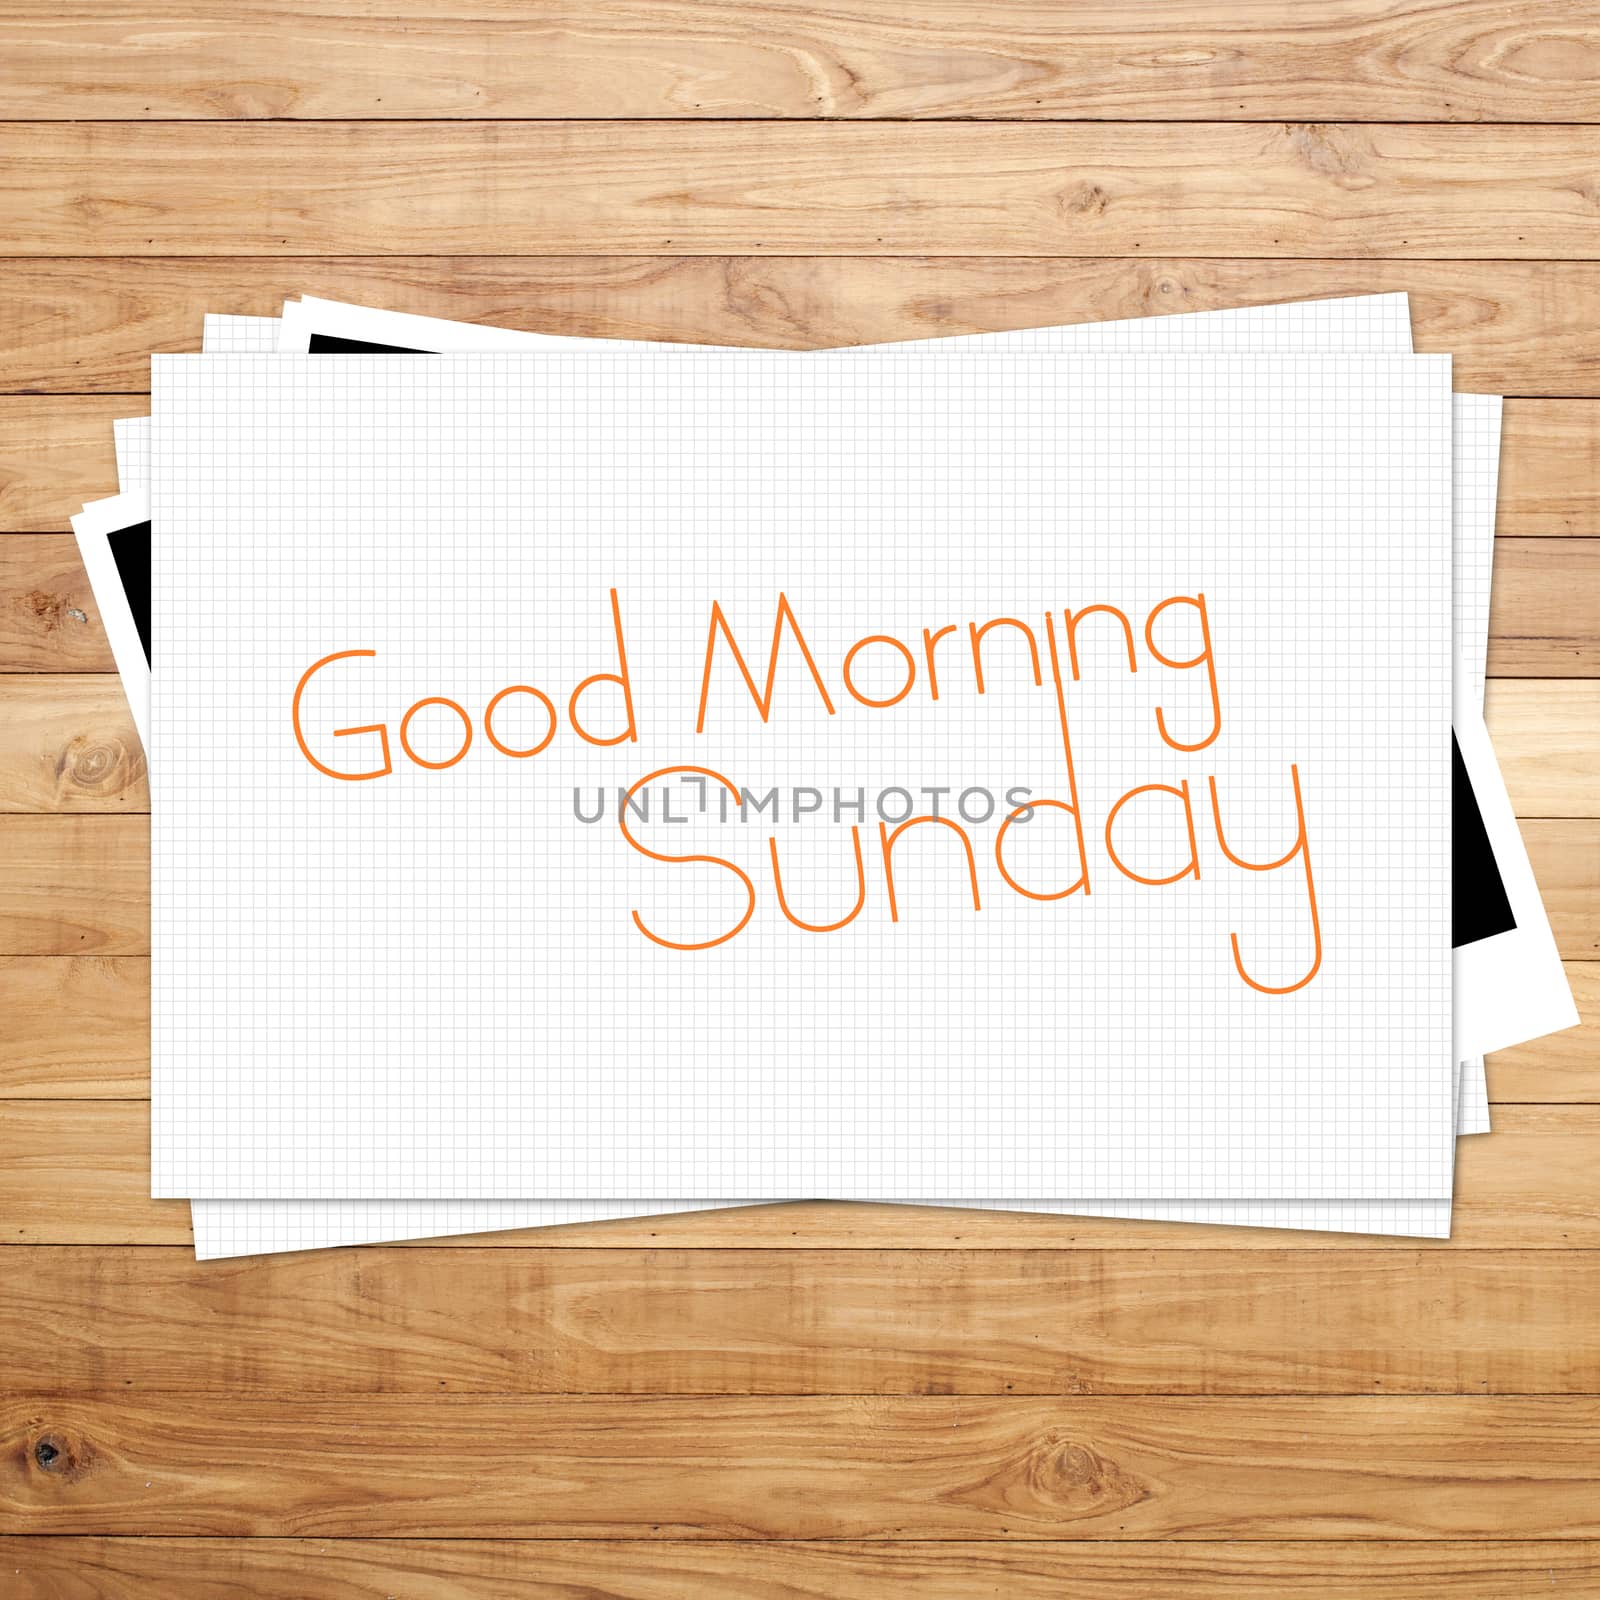 Good Morning Sunday on paper and Brown wood plank background